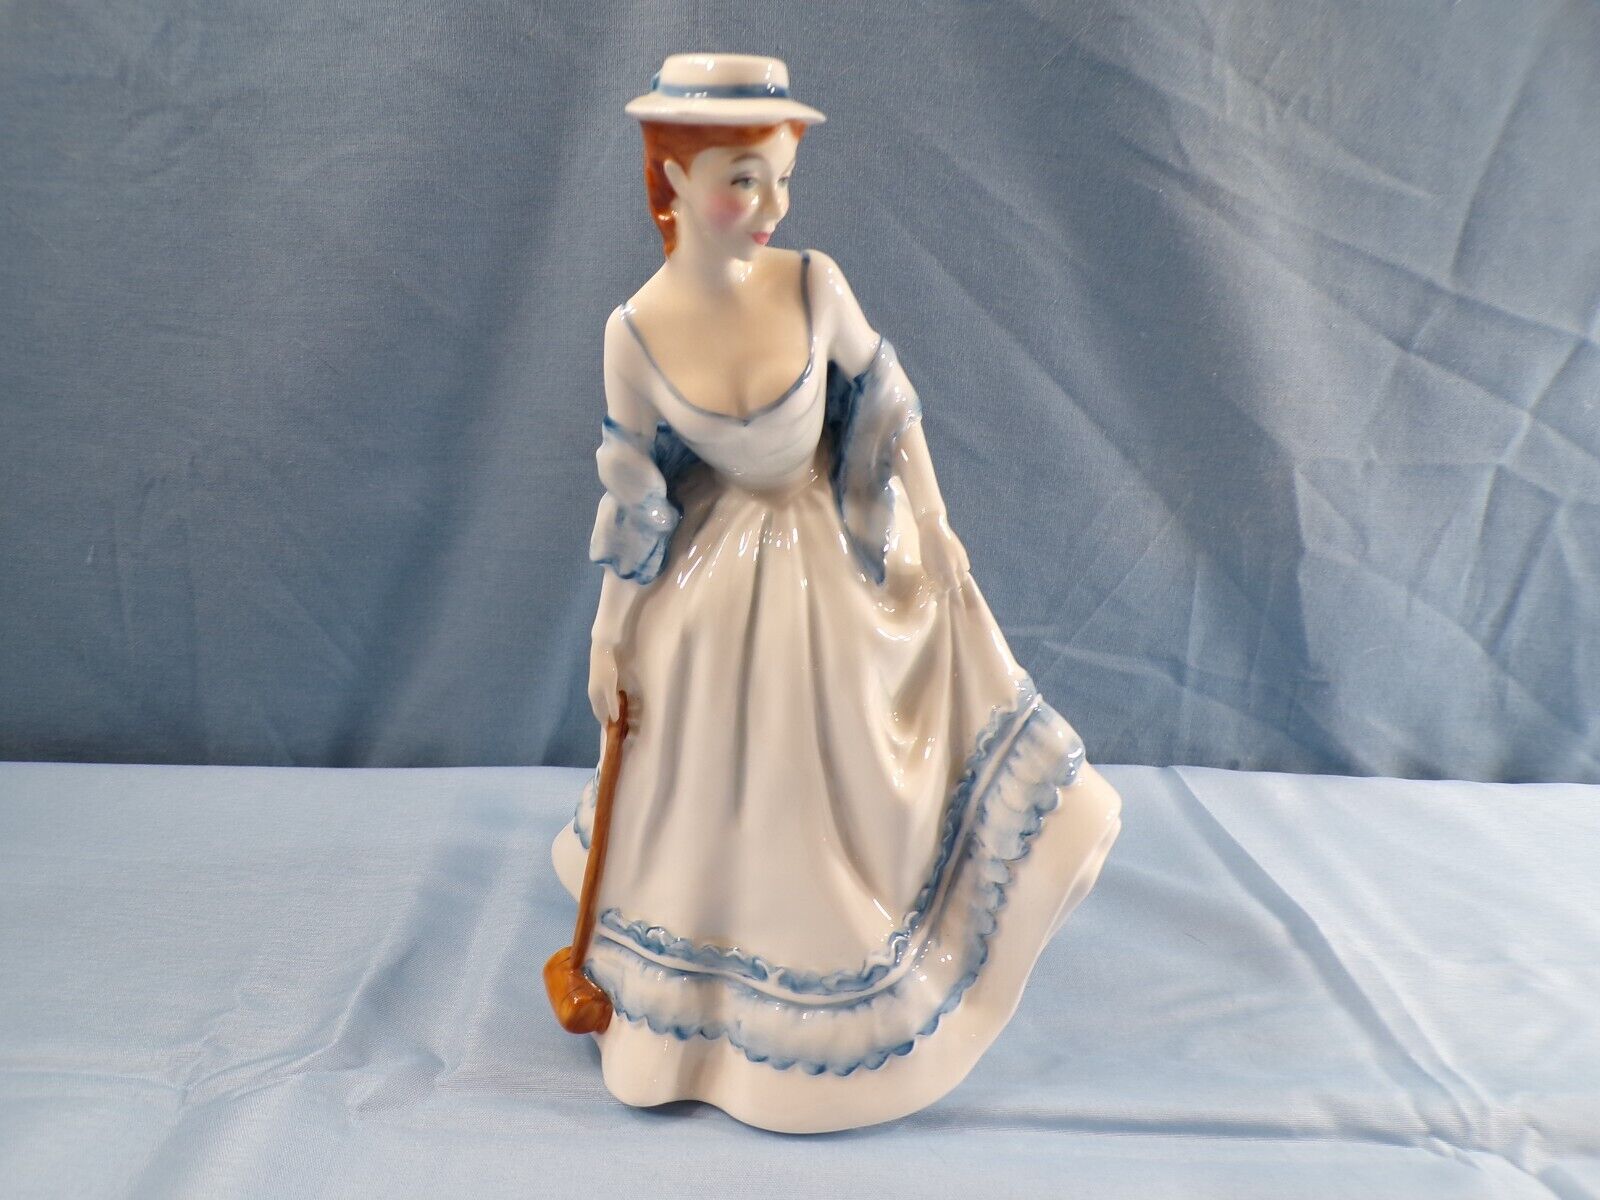 Collectors Club Royal Doulton Figurine HN3137 Summertime - Exc. Condition